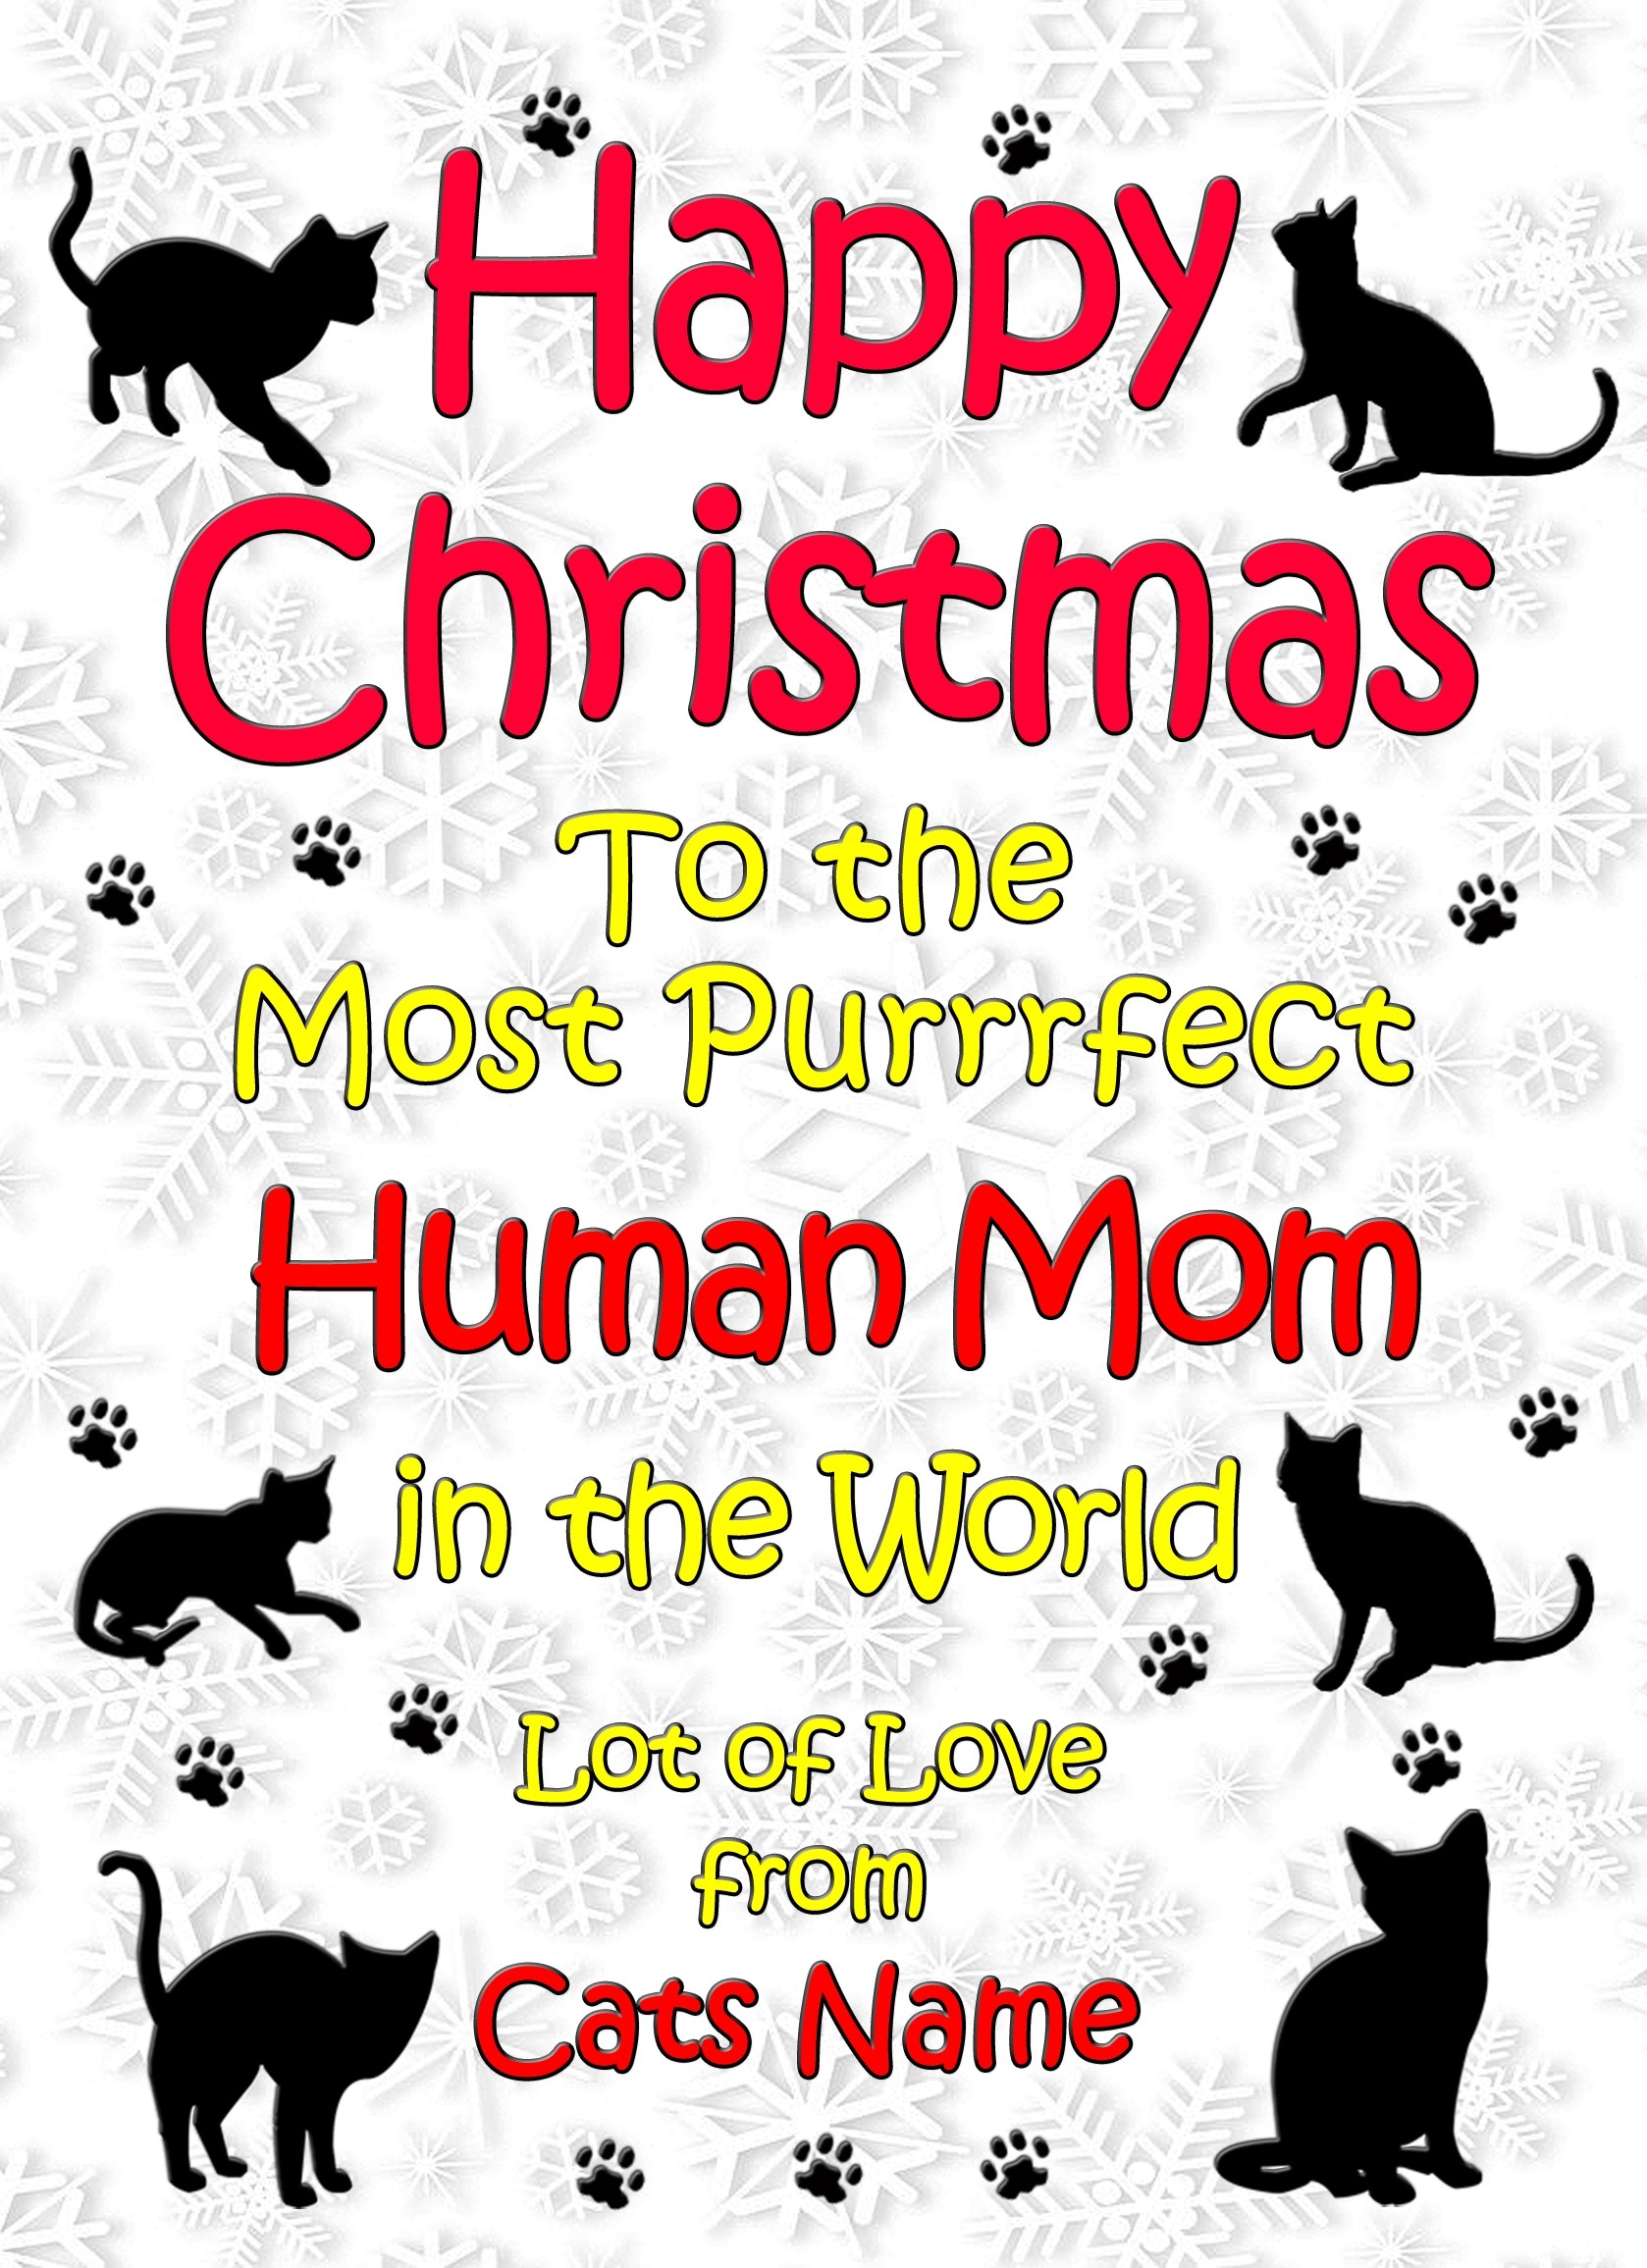 Personalised From The Cat Christmas Card (Human Mom, White)